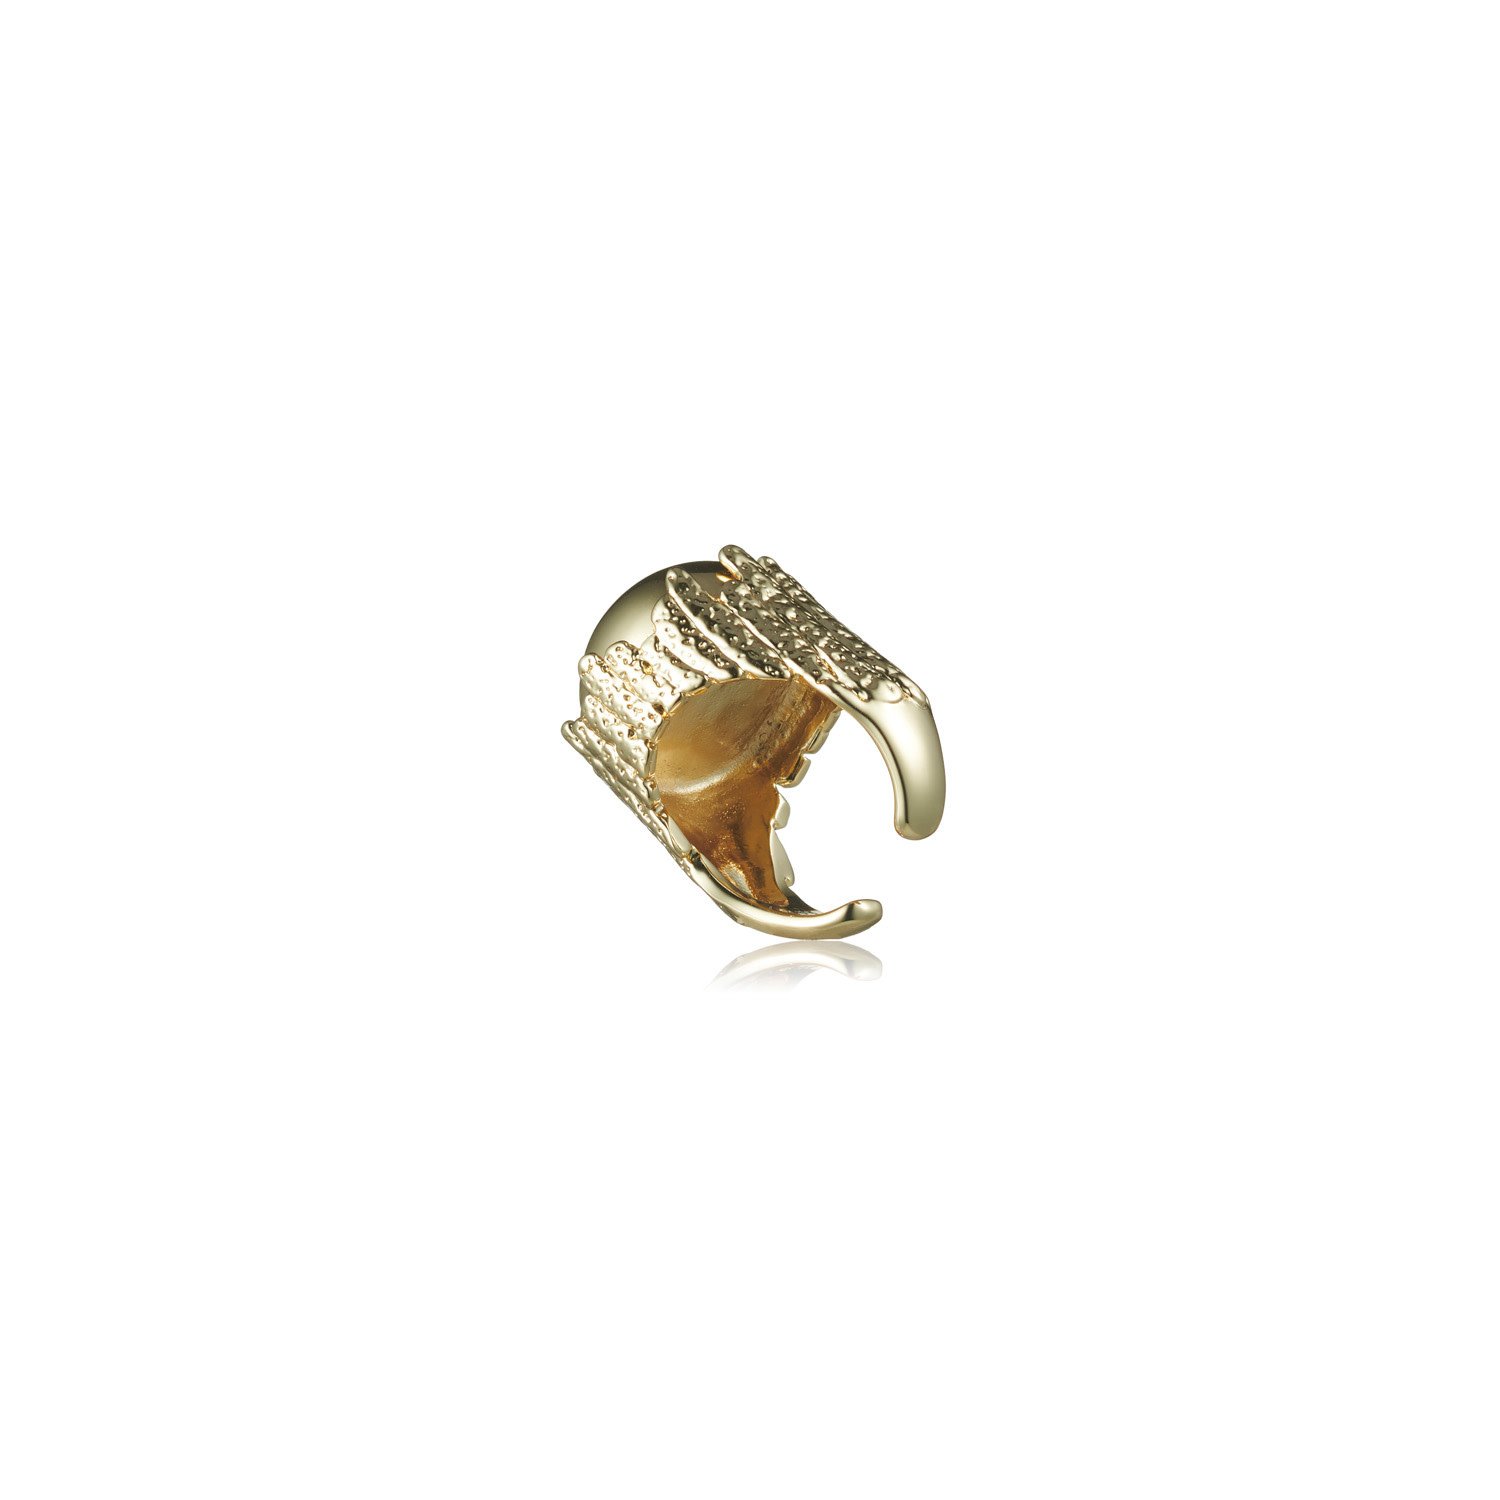 Jupiter Ring - Brut Baum Collection -14ct Gold Plated Ring - Sarina Suriano for BECKER MINTY-3